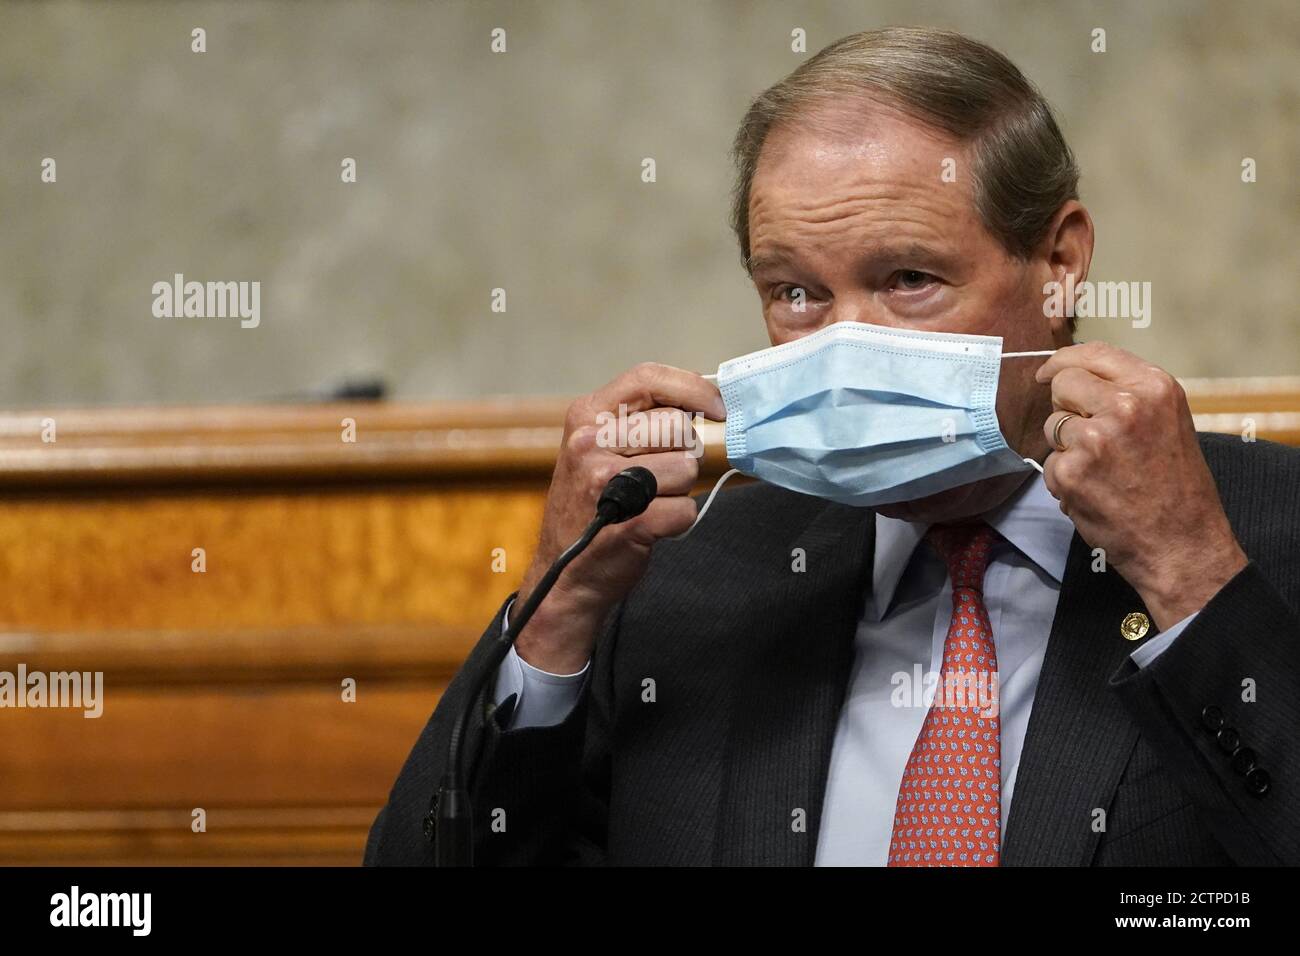 Washington, United States. 24th Sep, 2020. Sen. Tom Udall, D-N.M., puts on his mask after speaking during a Senate Foreign Relations Committee hearing on Capitol Hill in Washington, DC, on Thursday, September 24, 2020, during a hearing on U.S. policy in a changing Middle East. Pool photo by Susan Walsh/UPI Credit: UPI/Alamy Live News Stock Photo